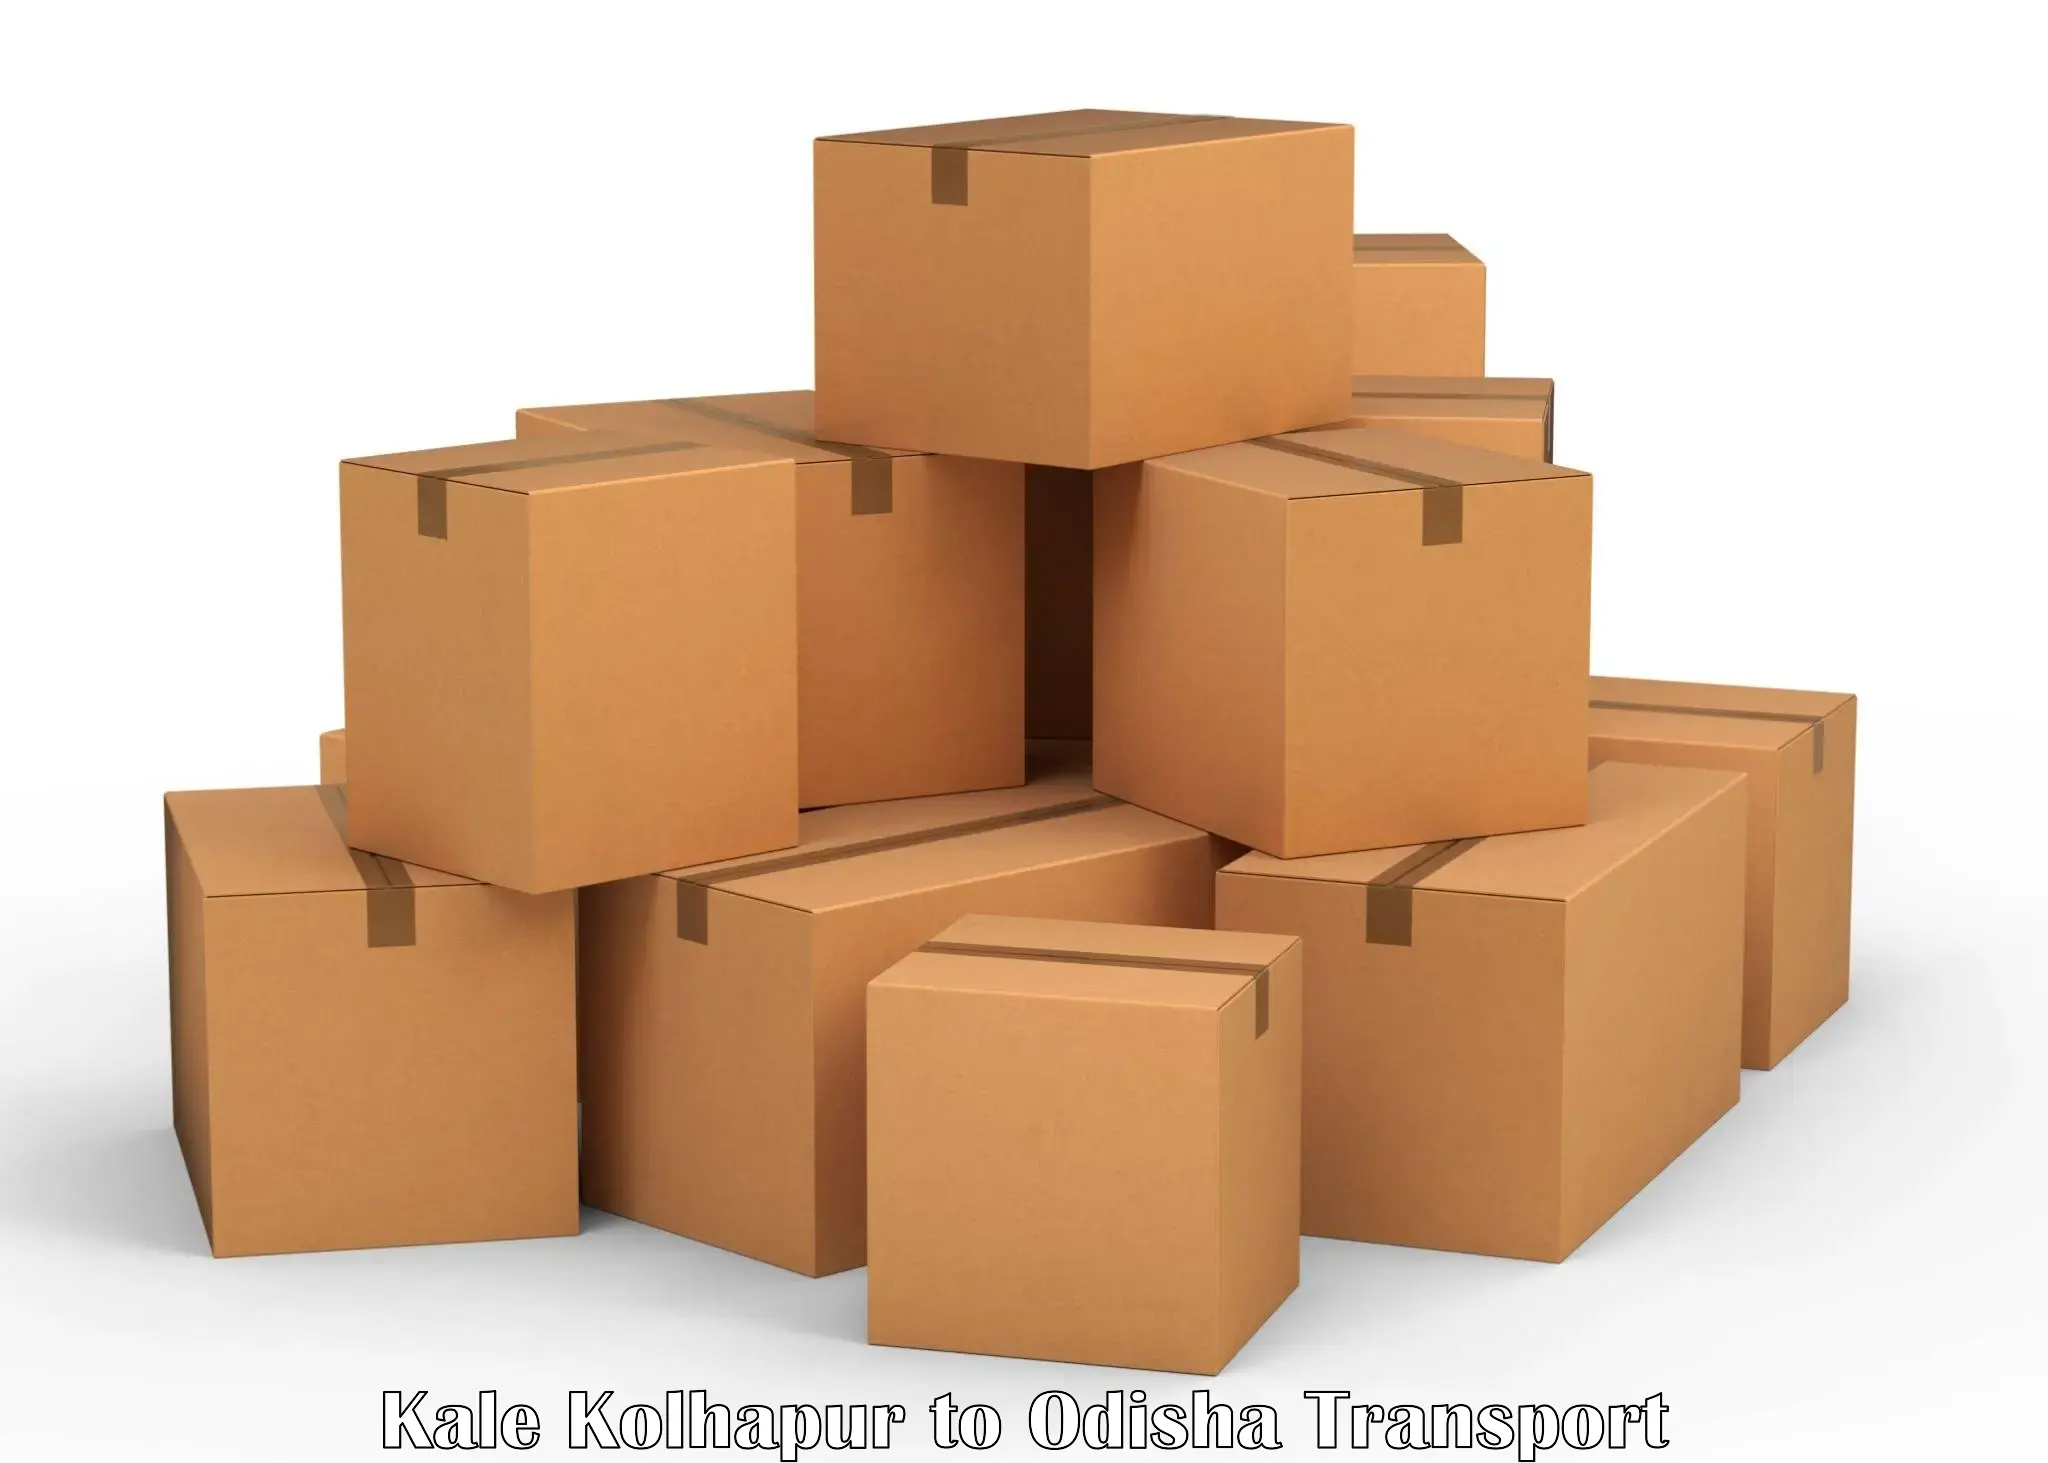 Truck transport companies in India Kale Kolhapur to Cuttack